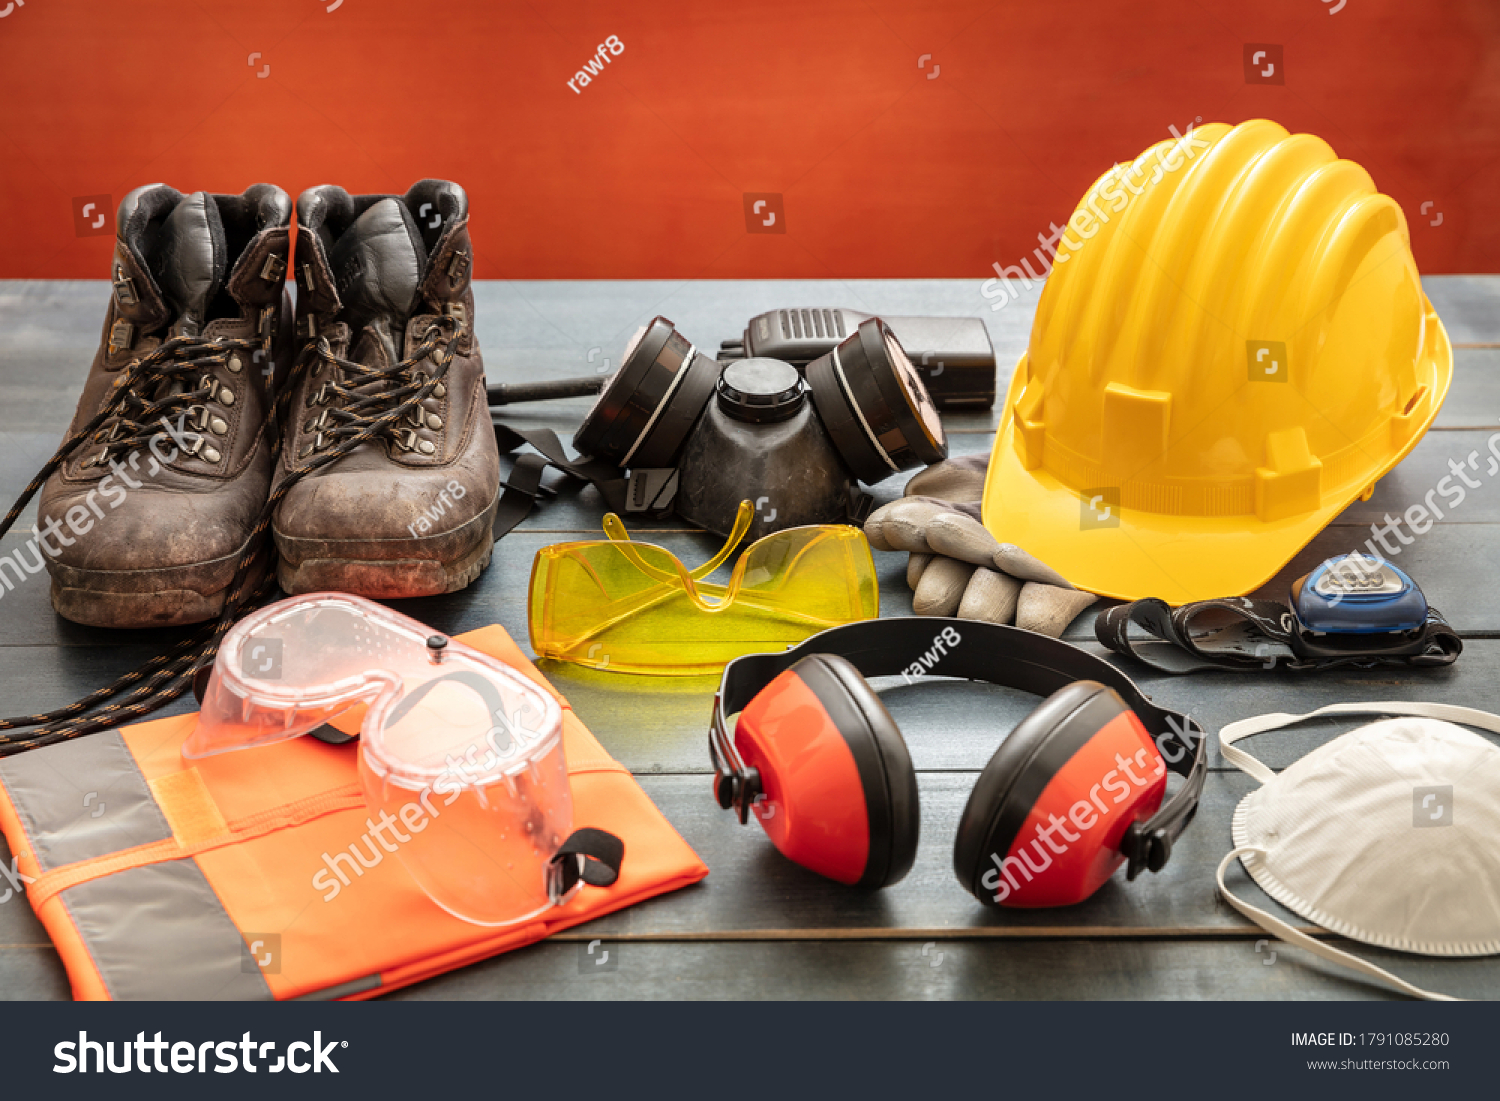 Work safety protection equipment. Industrial protective gear on wooden table, red color background. Construction site health and safety concept #1791085280